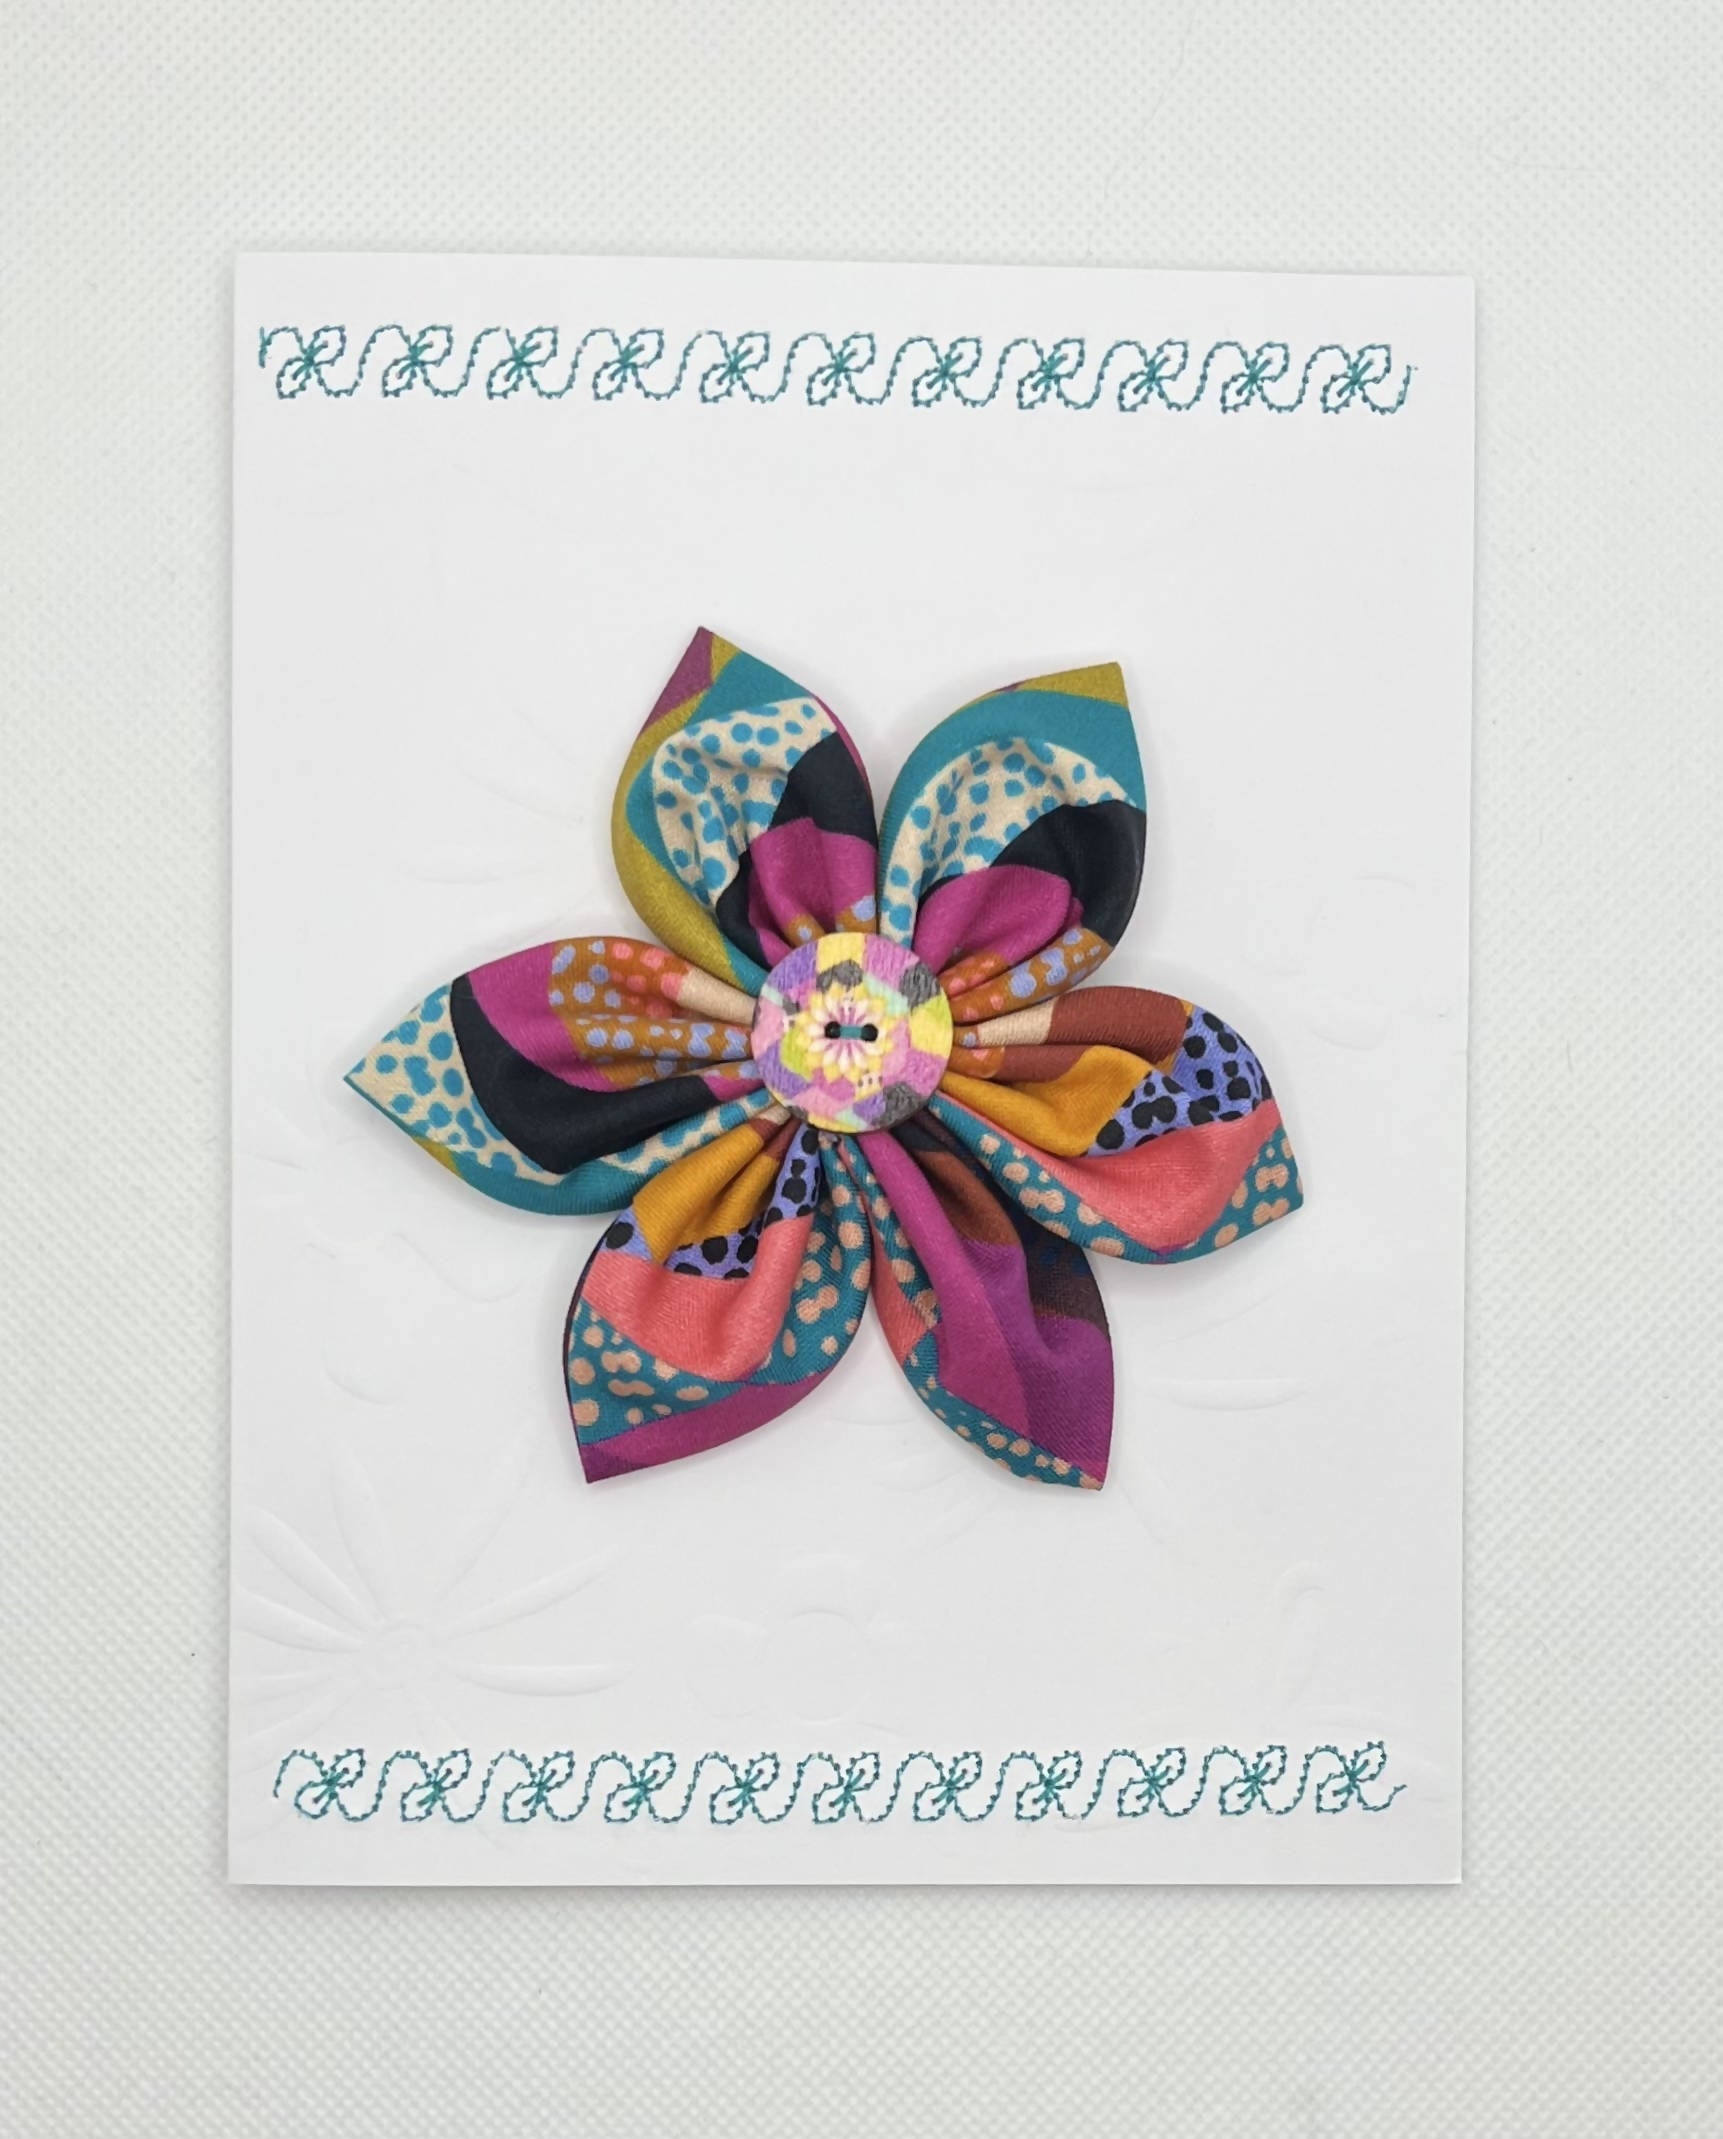 3D Fabric Flower Handcrafted Birthday Card